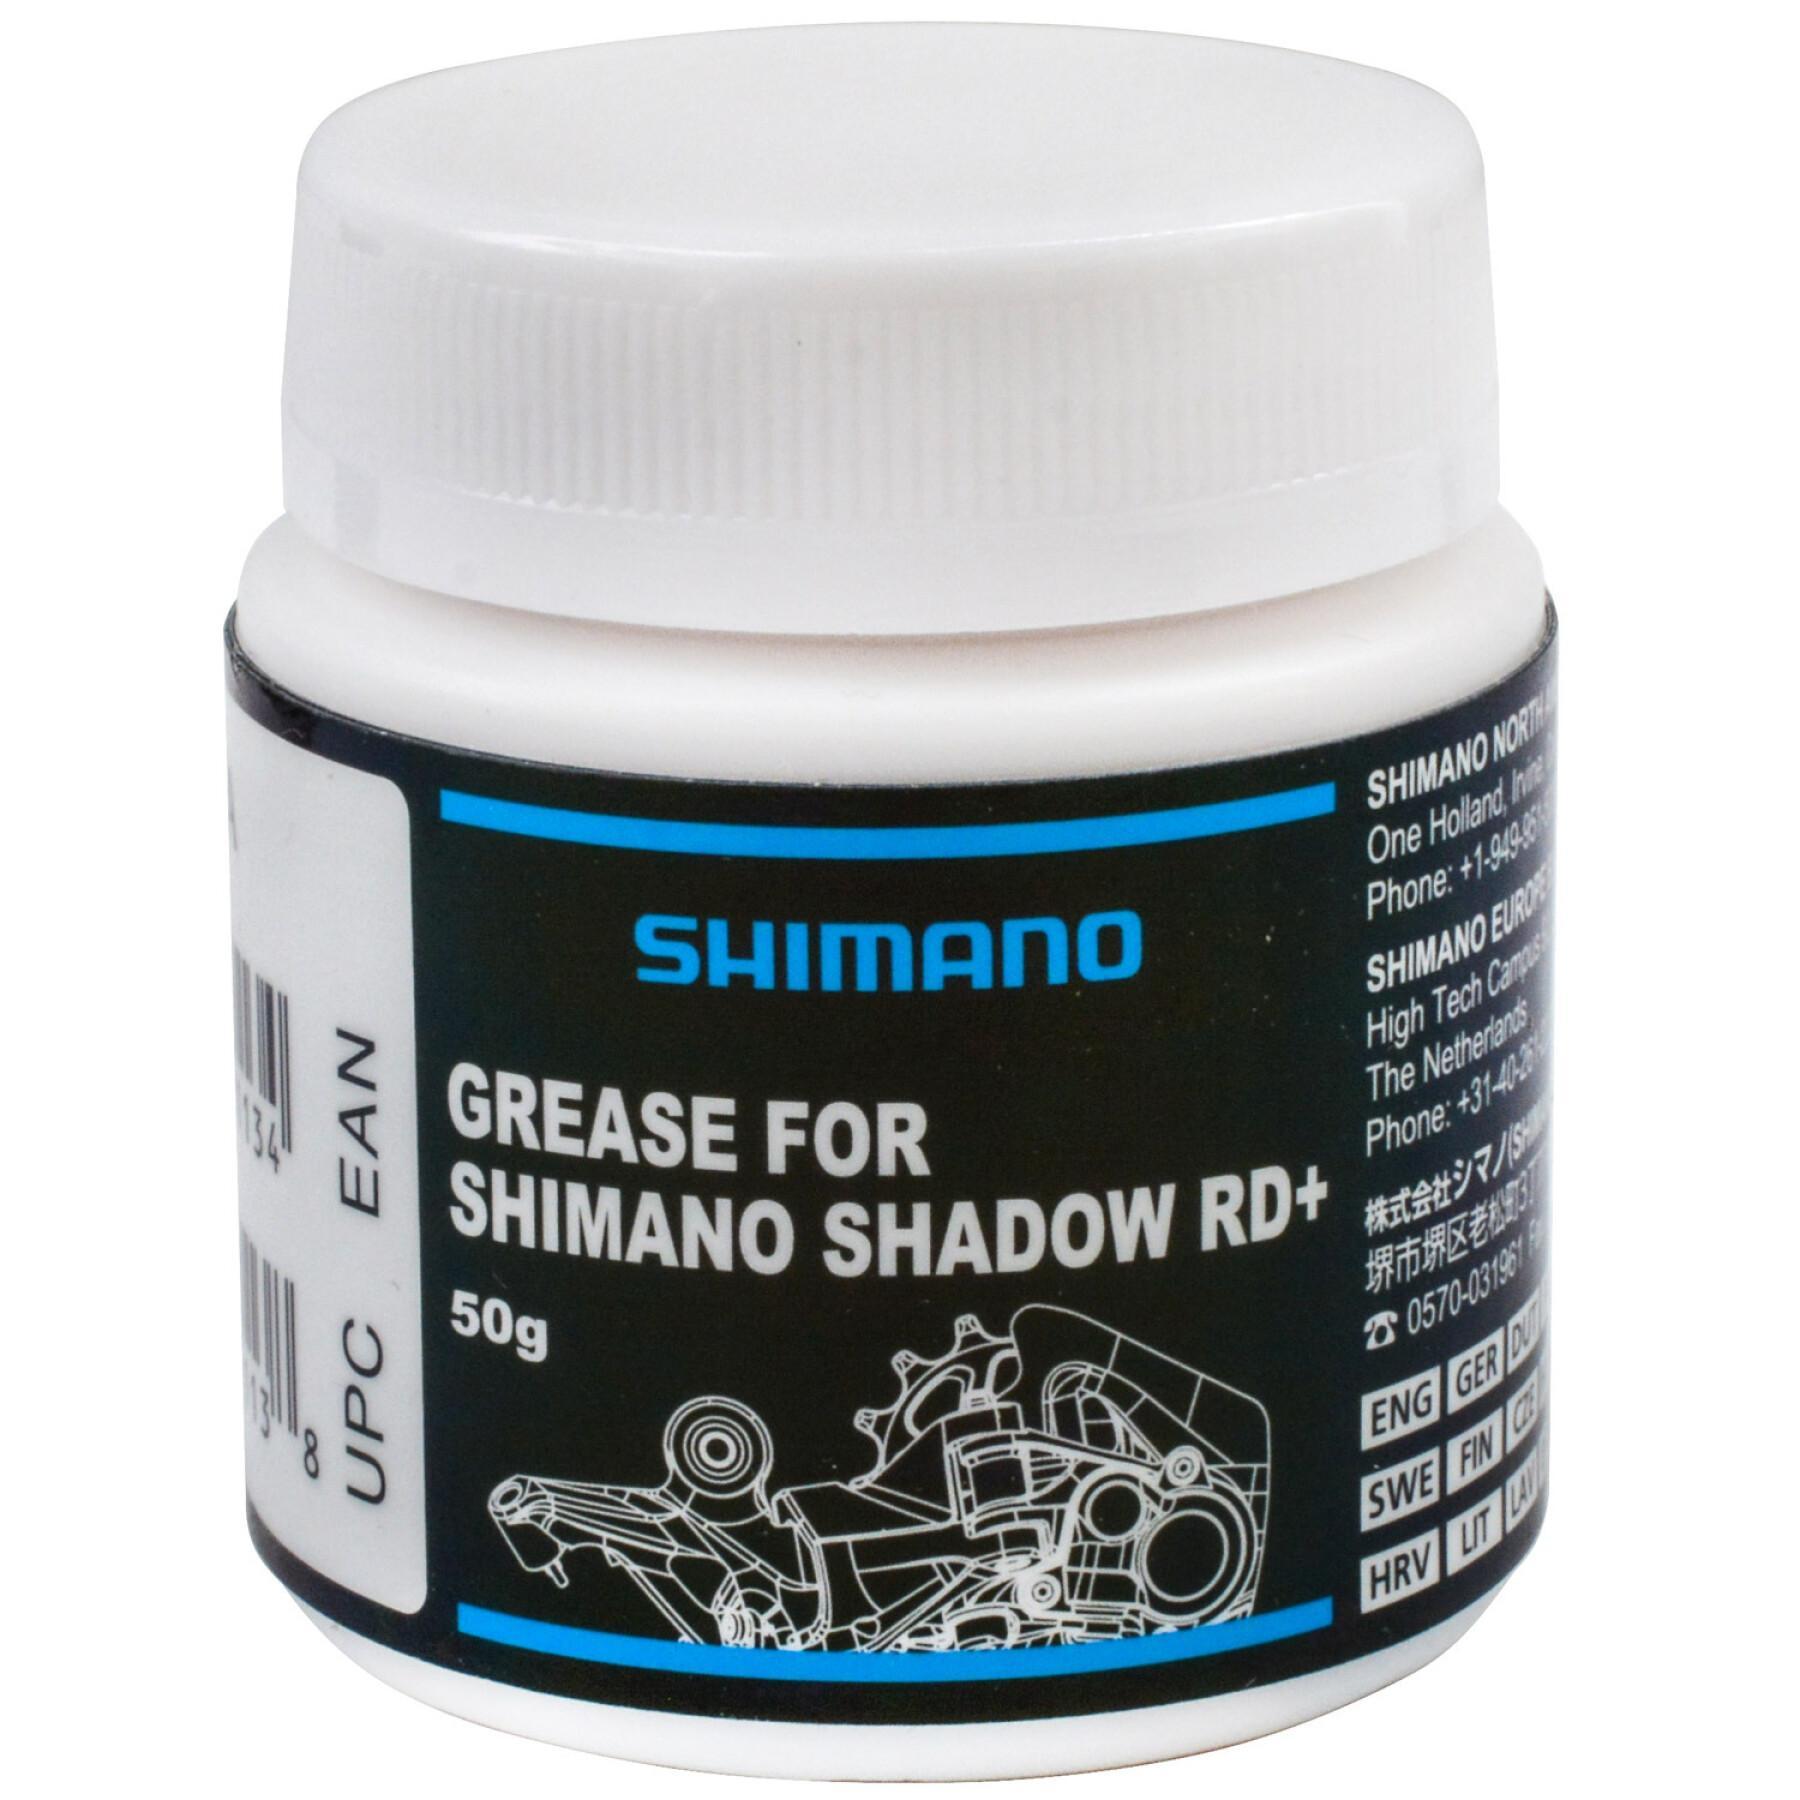 New grease for stabilizer for Shimano 50 g